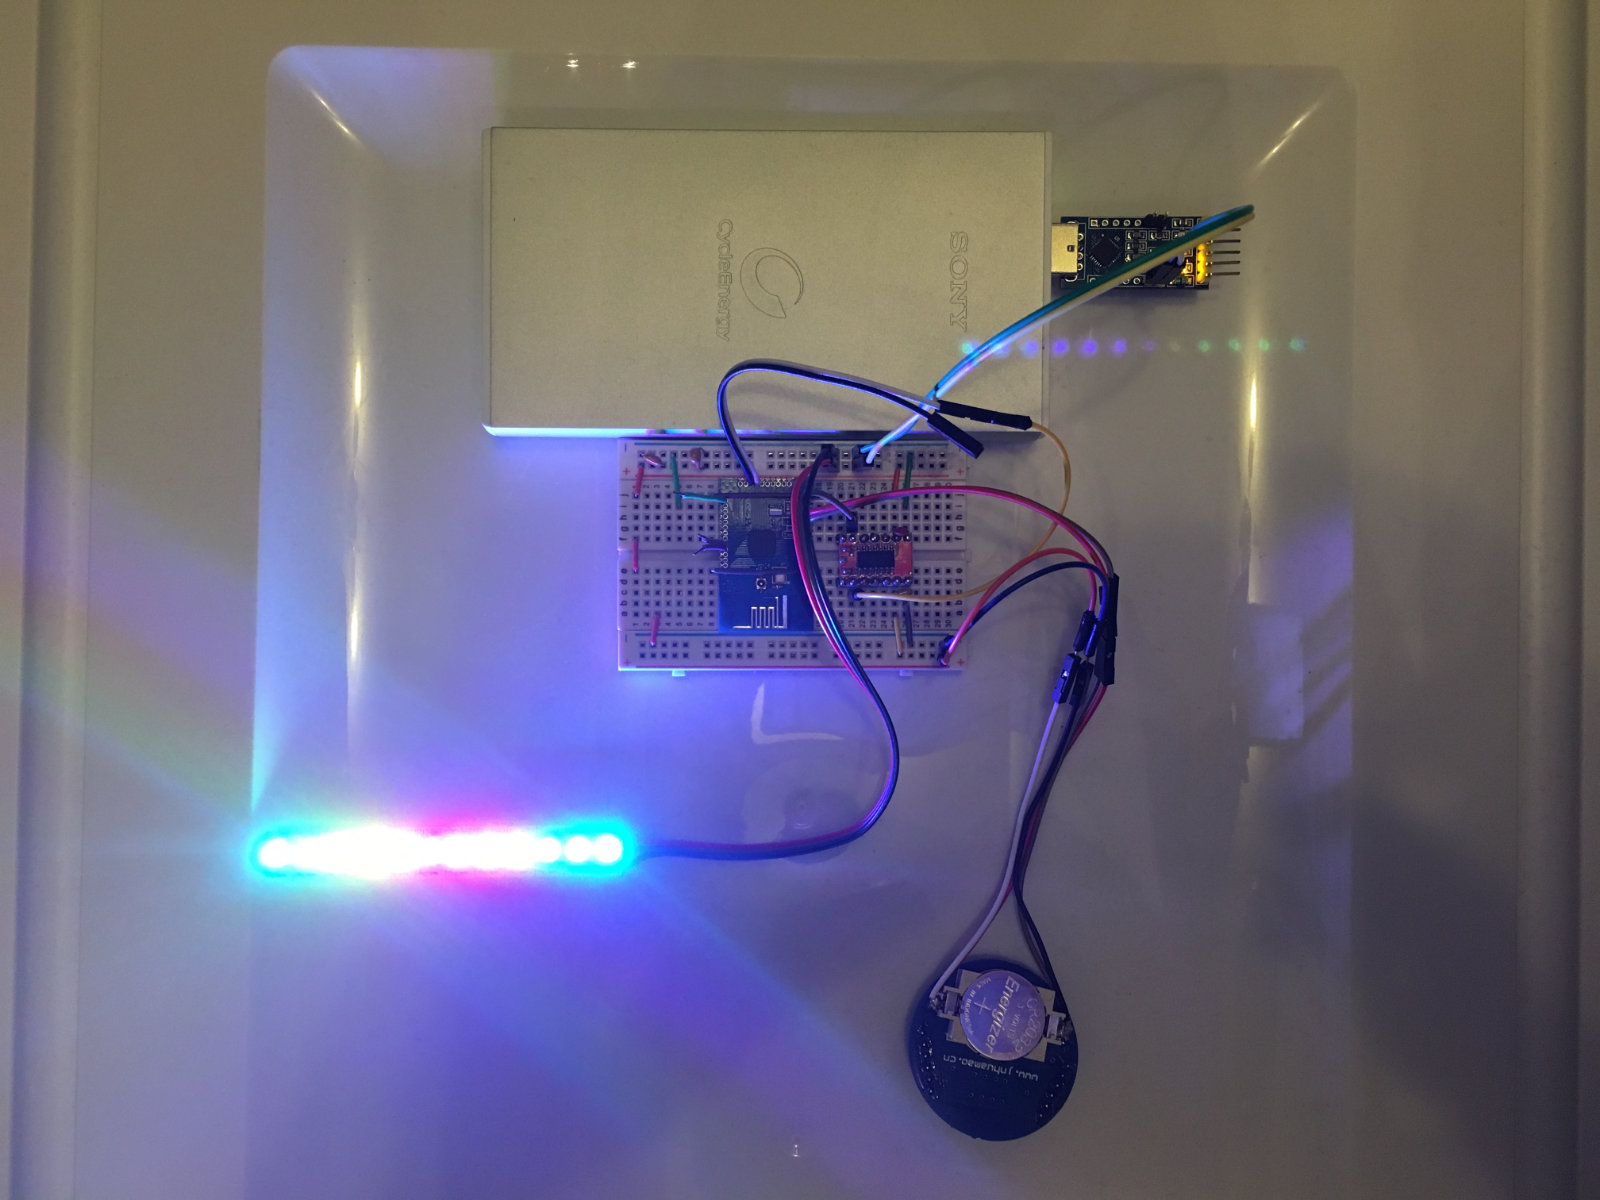 Using Bluetooth to control a NeoPixel LED strip